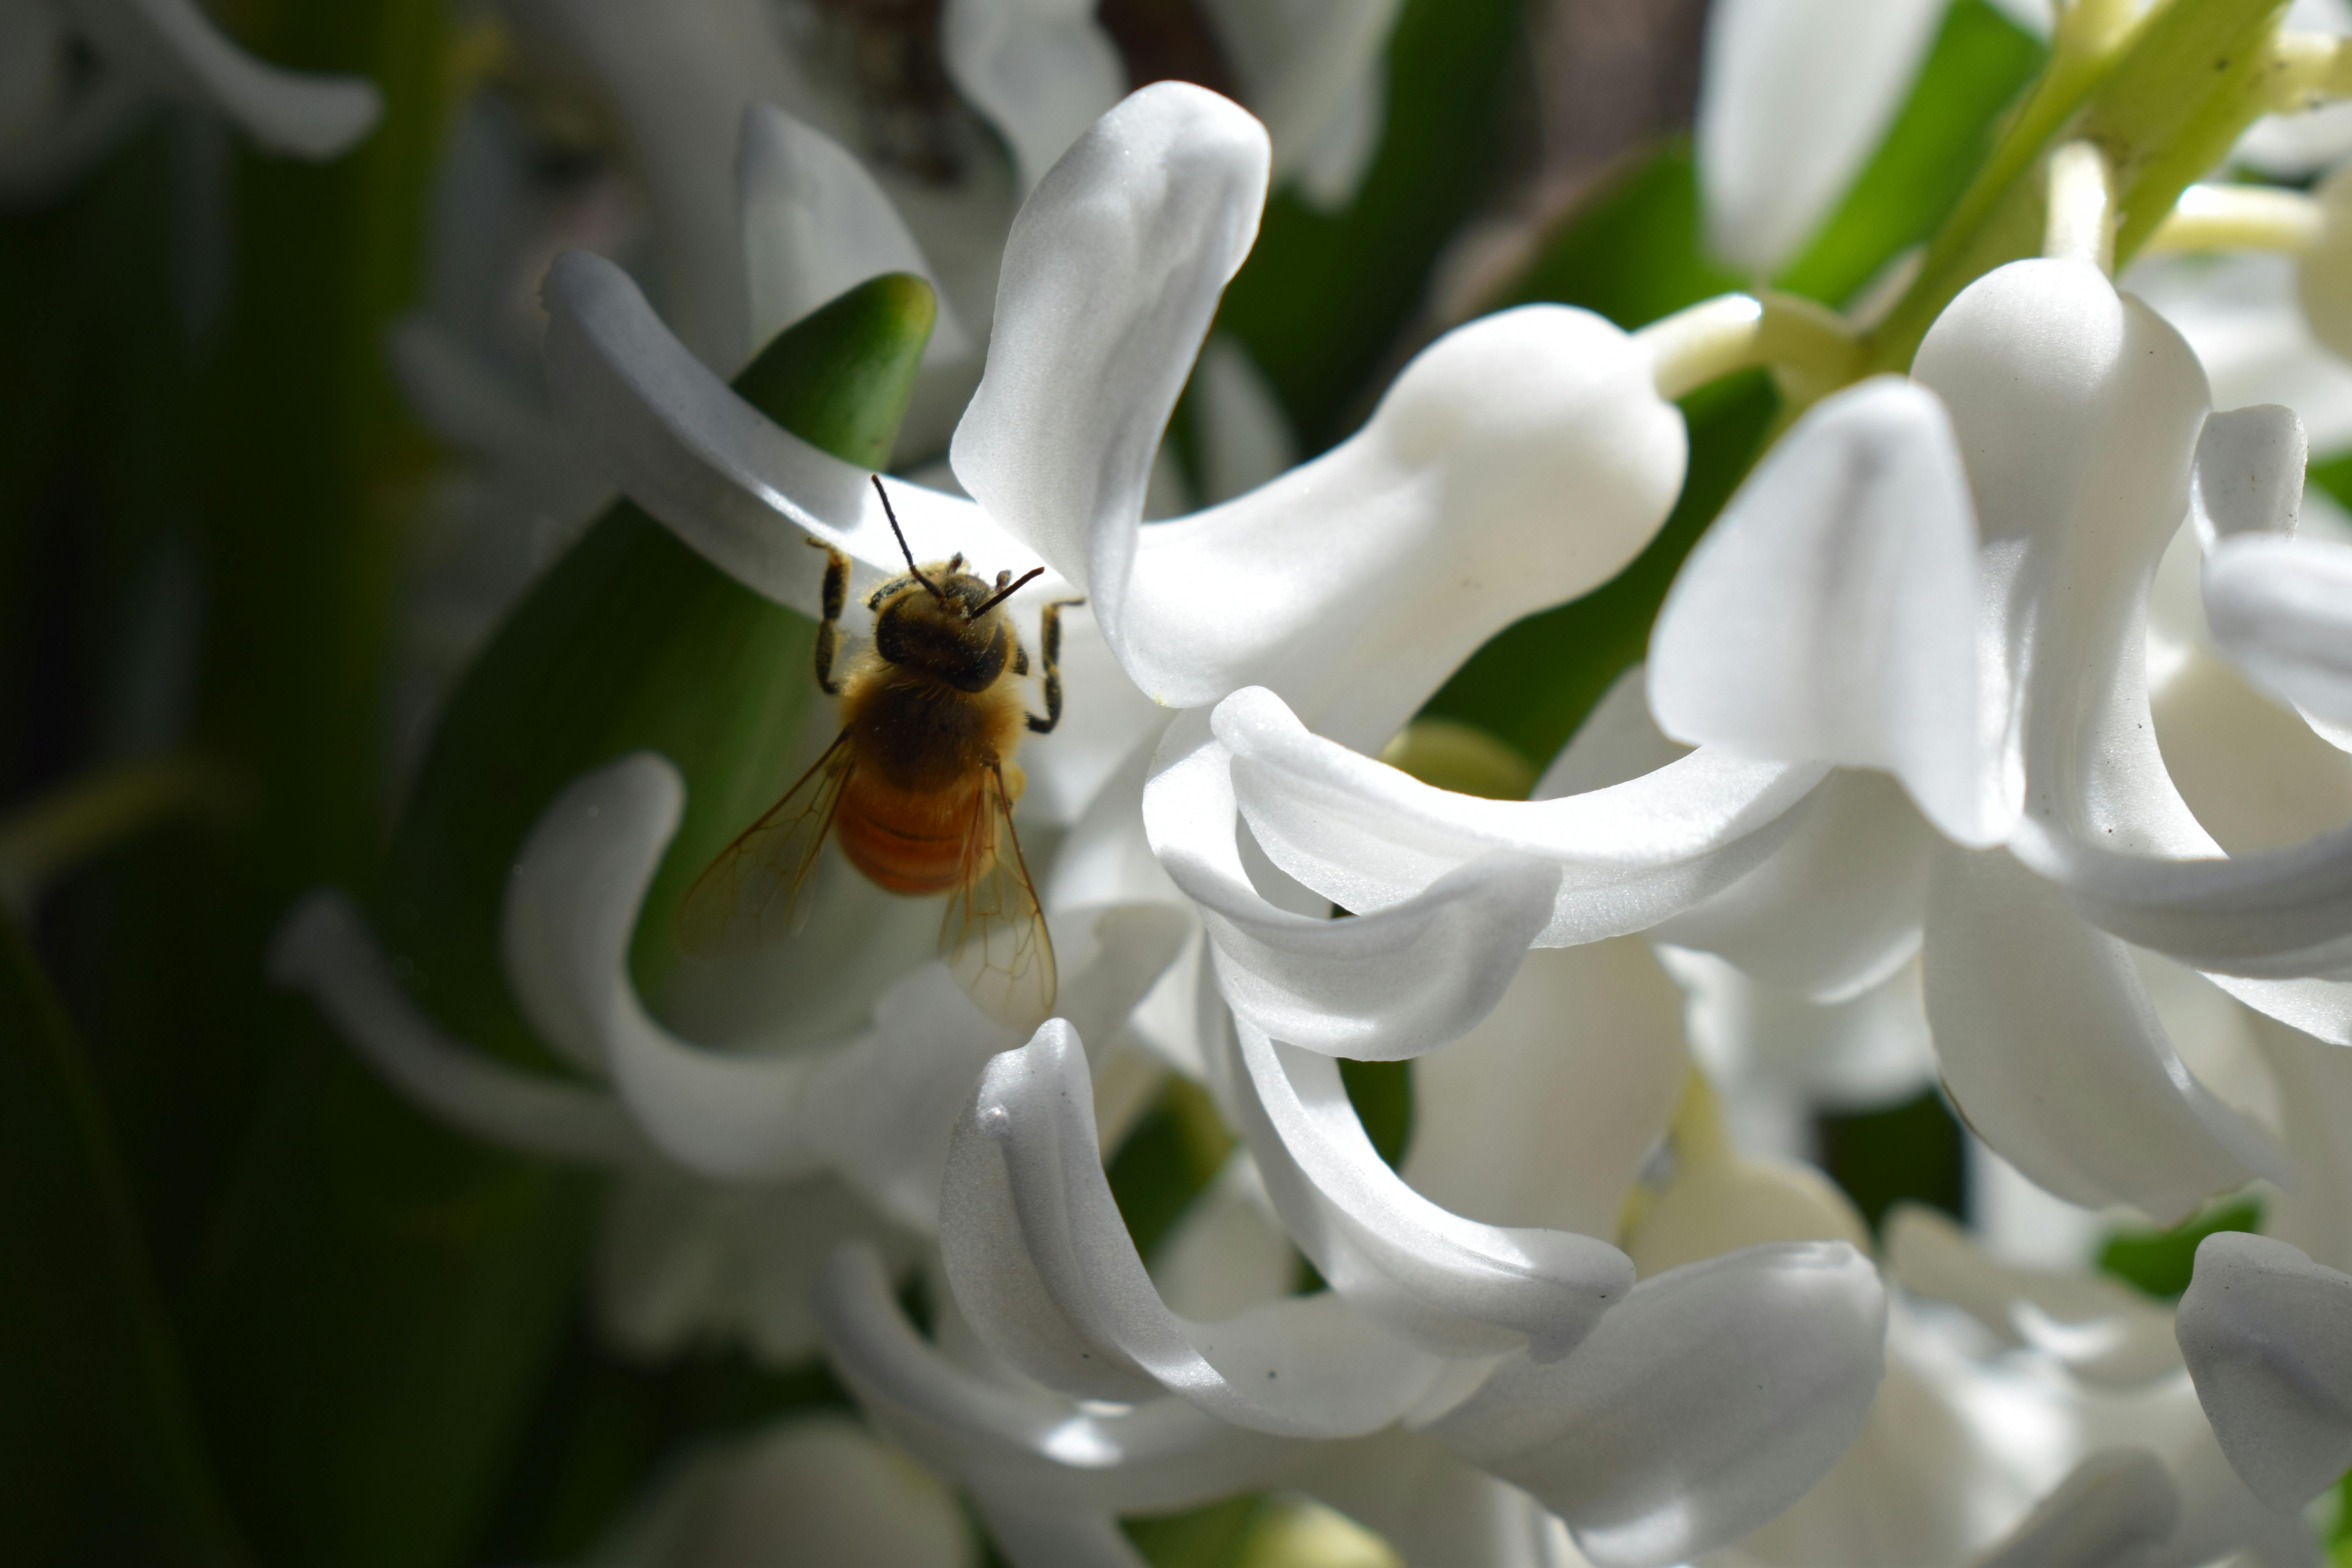 A Bee Pollinating Our Town